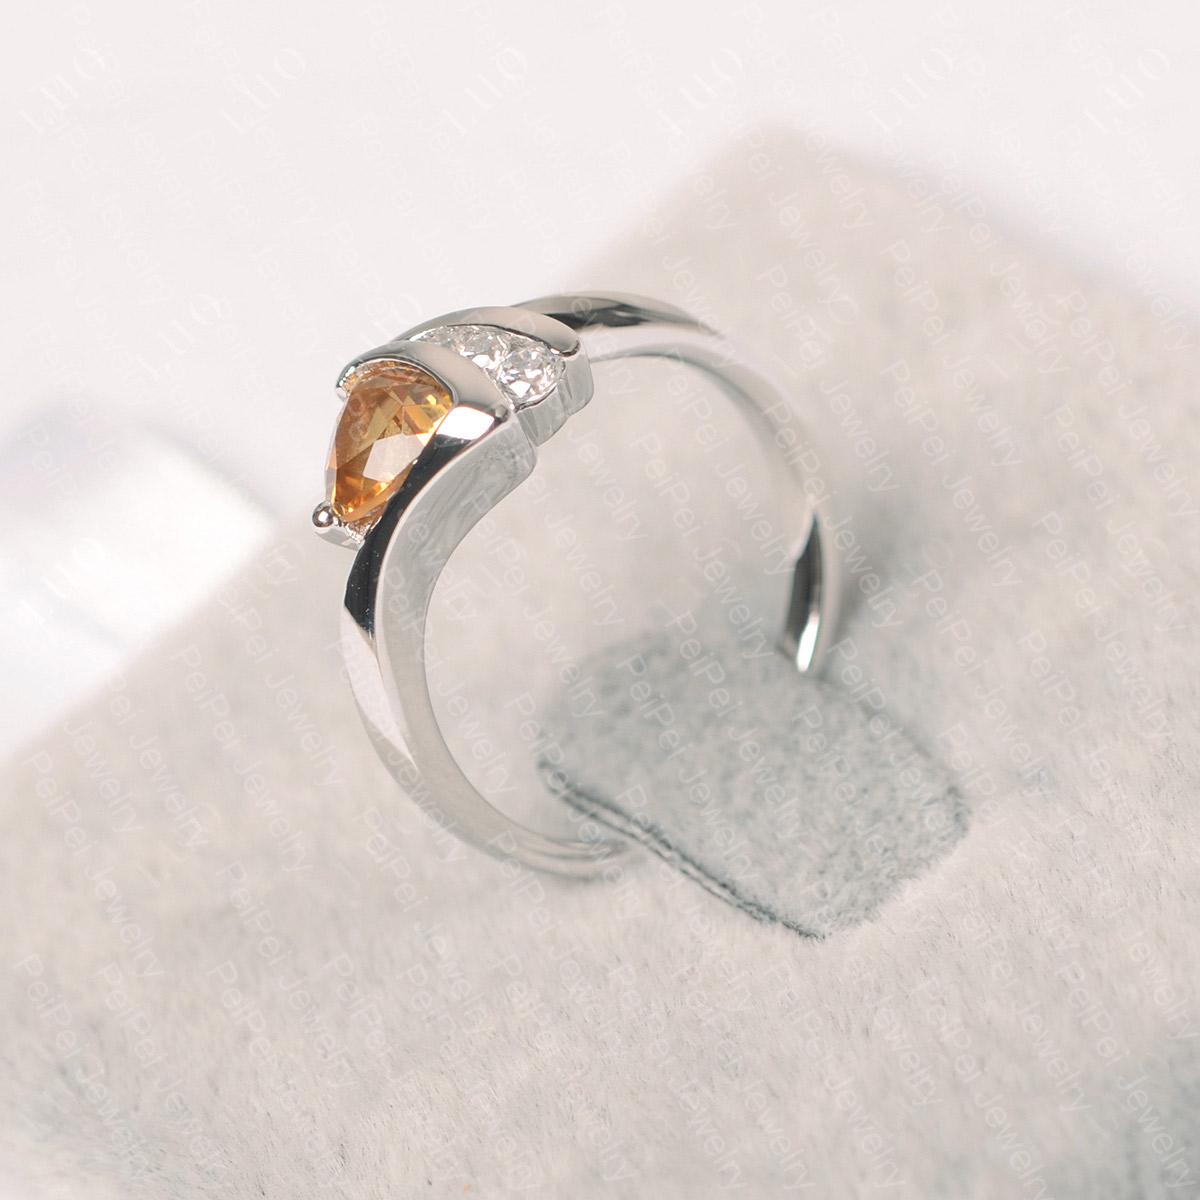 Trillion Cut Citrine Sailboat Inspire Ring - LUO Jewelry